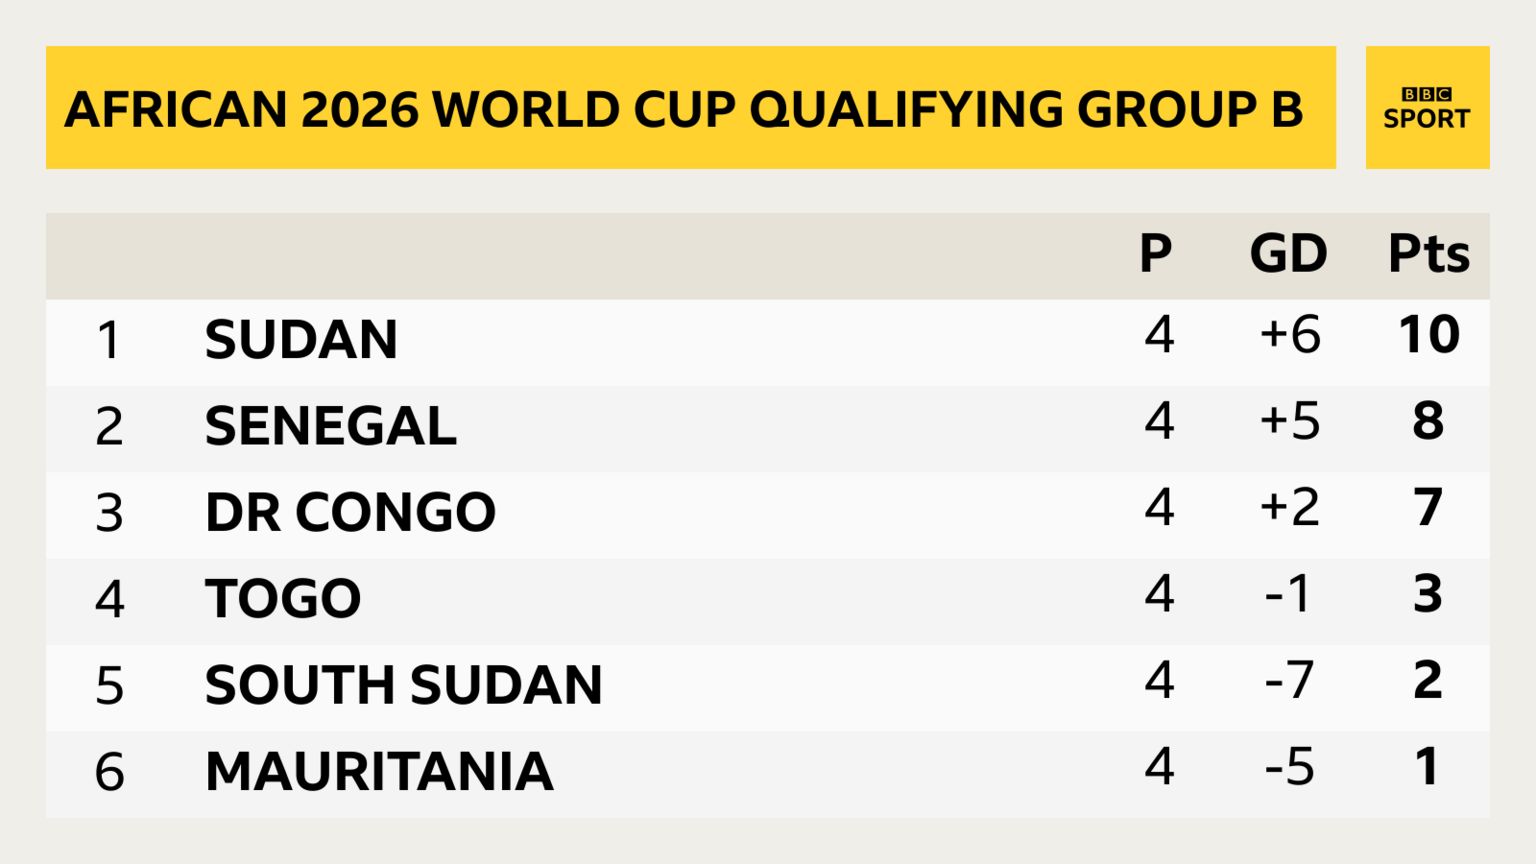 A graphic of the Group B table in African qualifying for the 2026 World Cup, showing Sudan top and two points ahead of Senegal